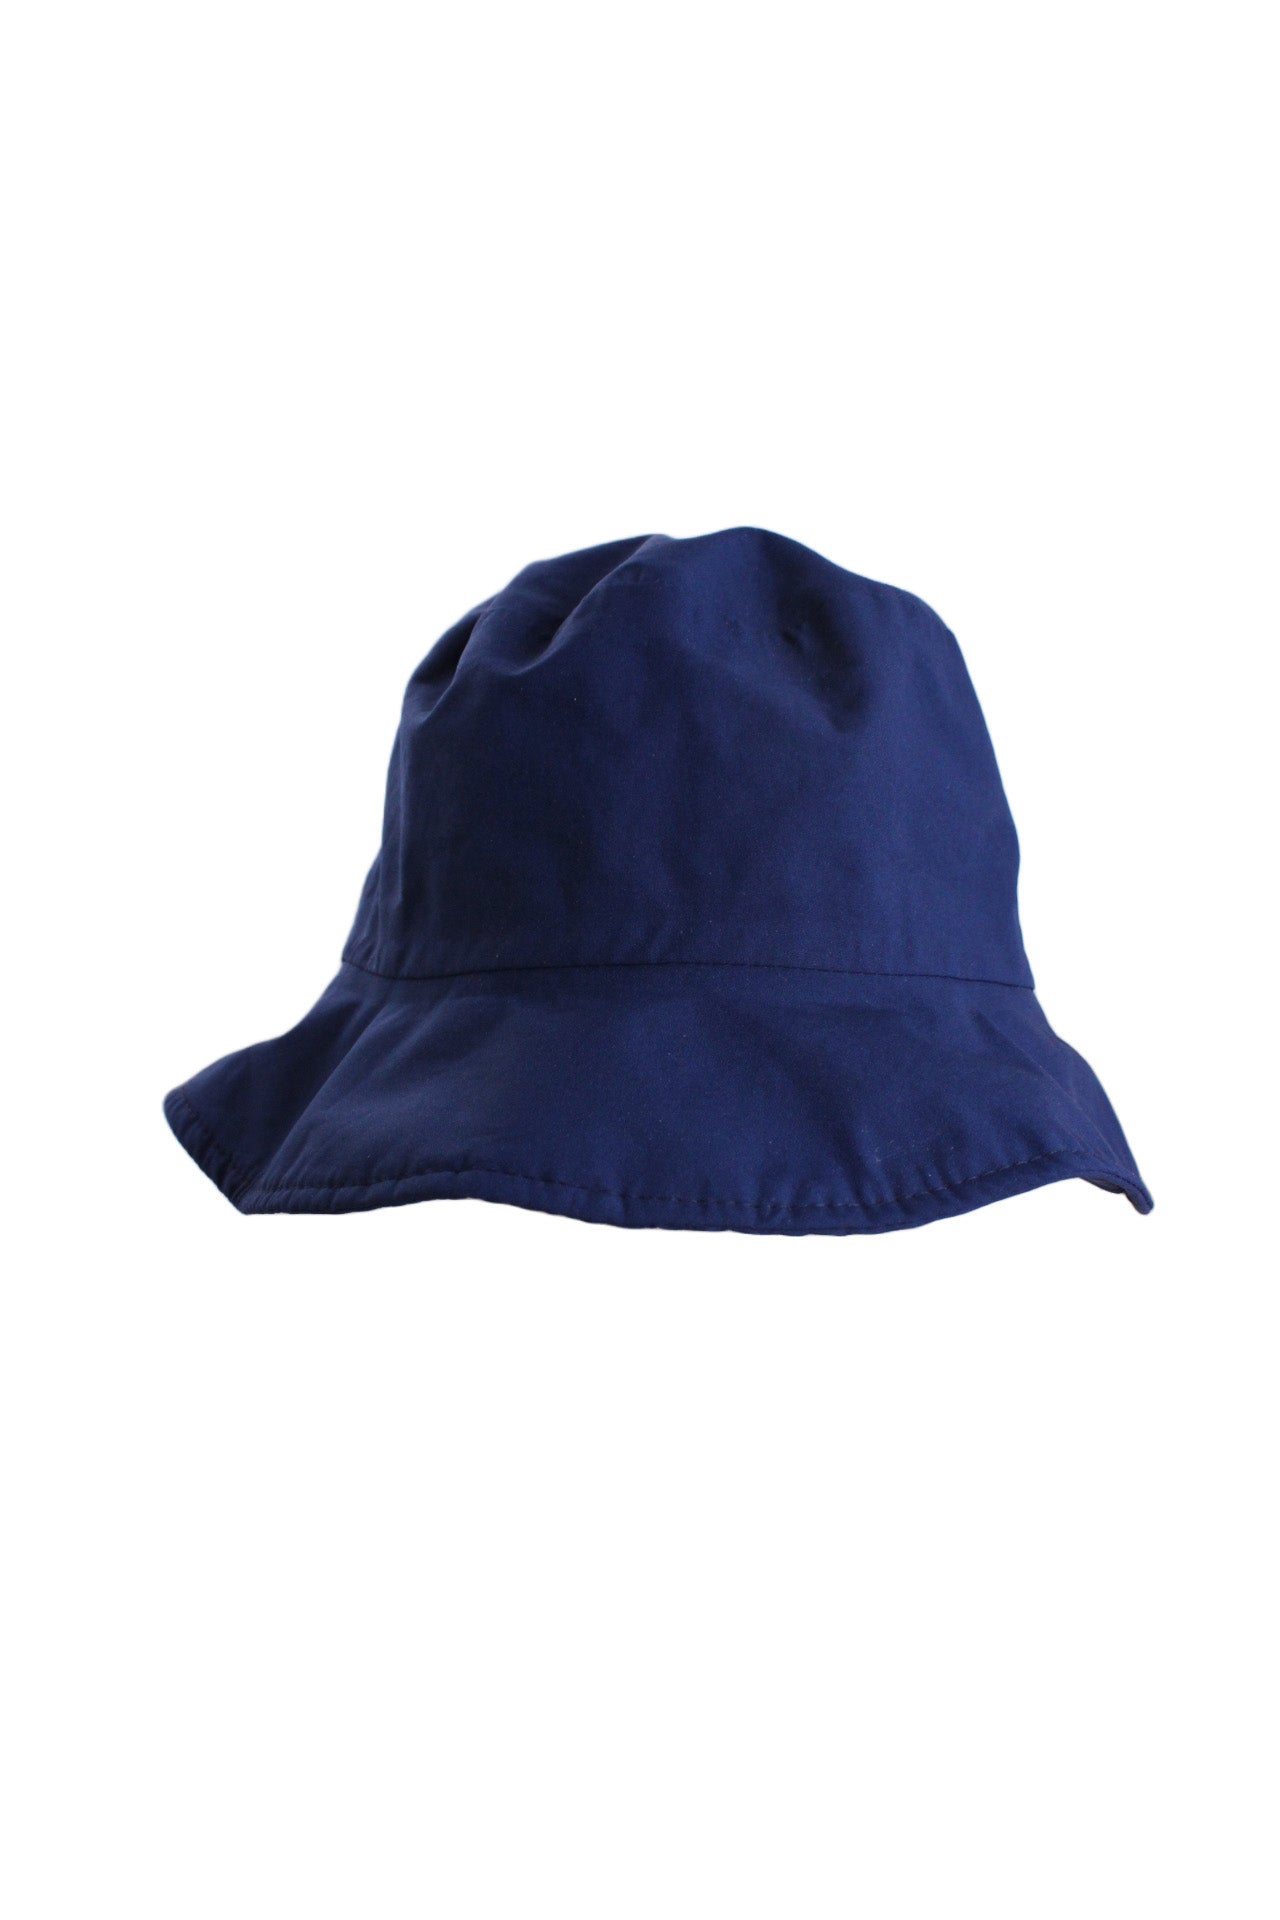 front of forrester’s navy unisex gore-tex bucket hat. features sweatband, full lining, and a brim measuring ~ 2.25”.